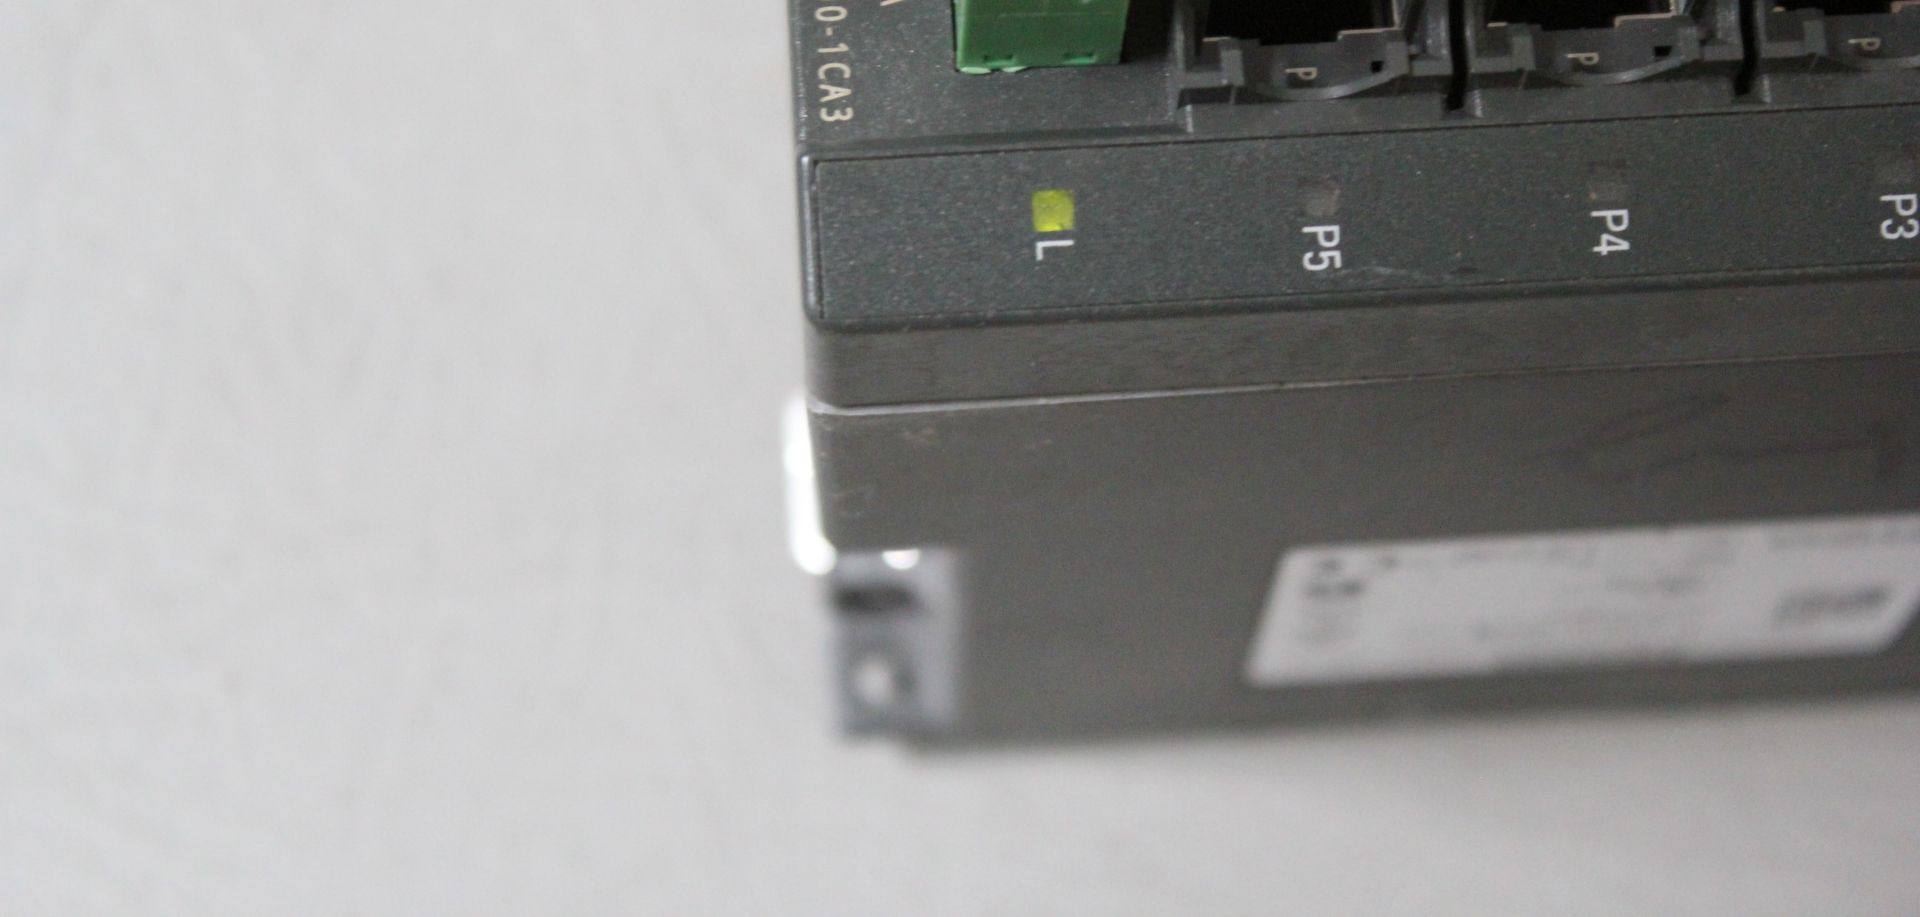 SIEMENS SIMATIC NET INDUSTRIAL ETHERNET SWITCH - Image 6 of 6